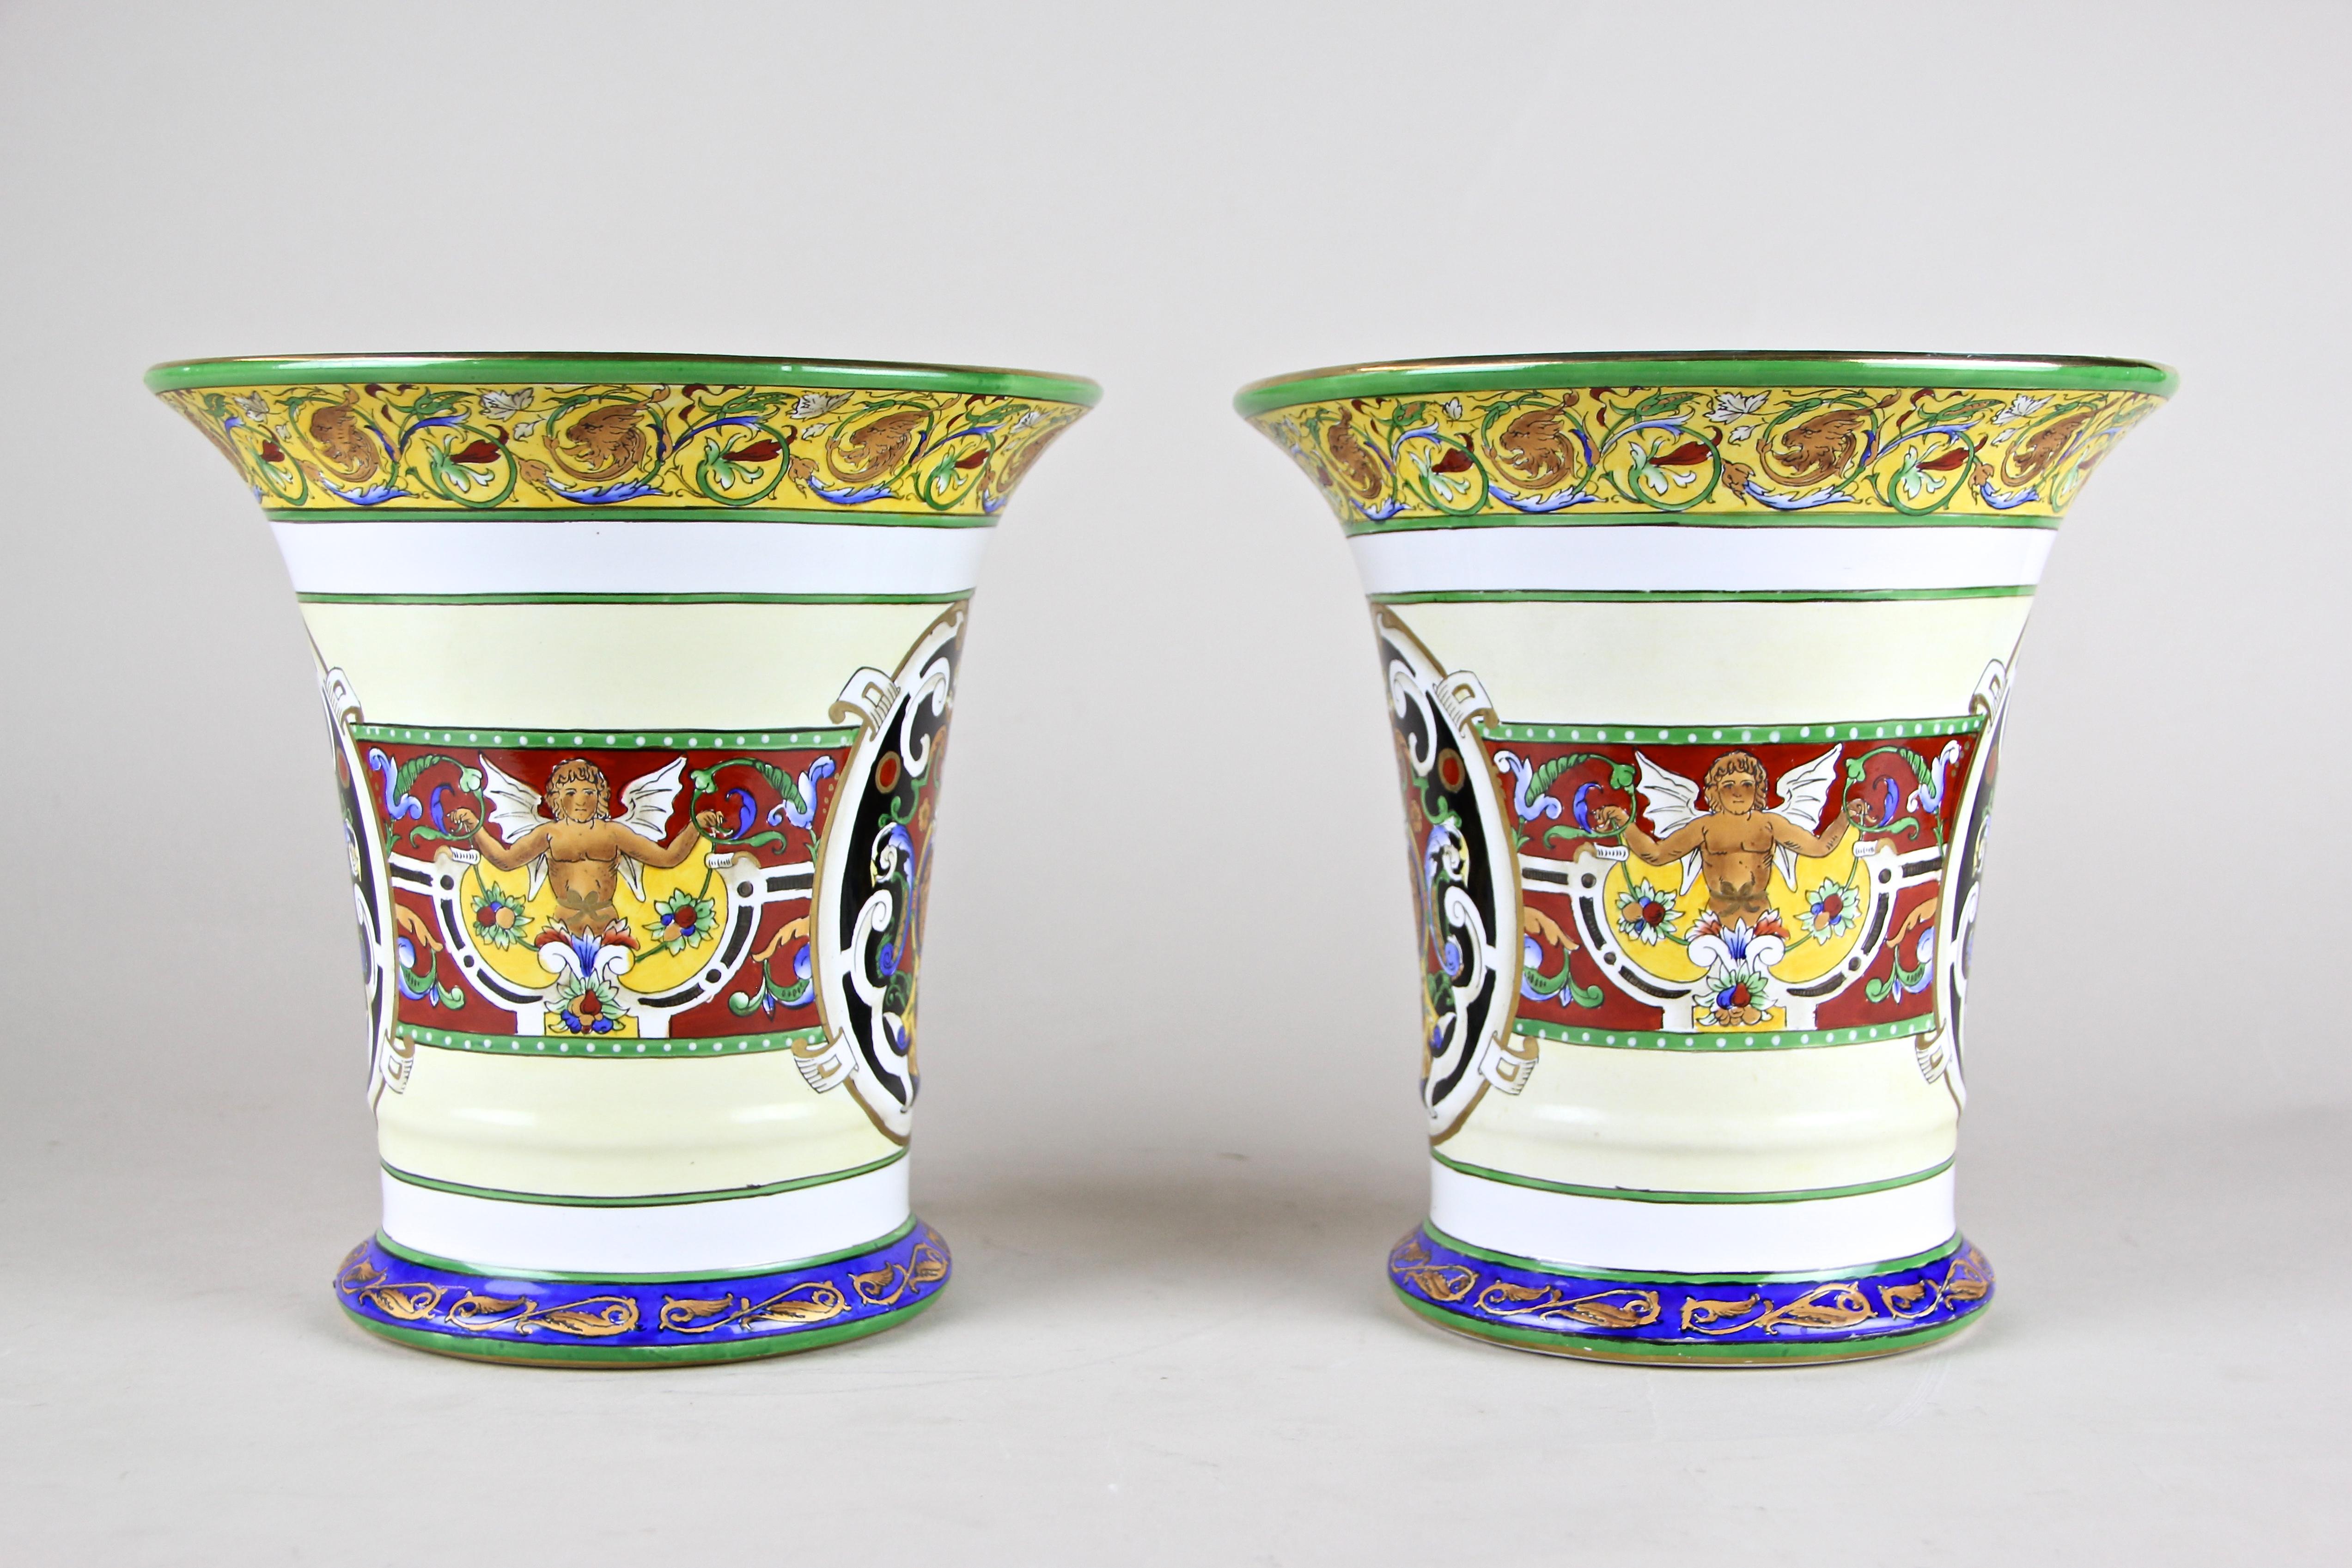 Hand-Painted Pair of Hand Painted Porcelain Vases, Italy, circa 1900